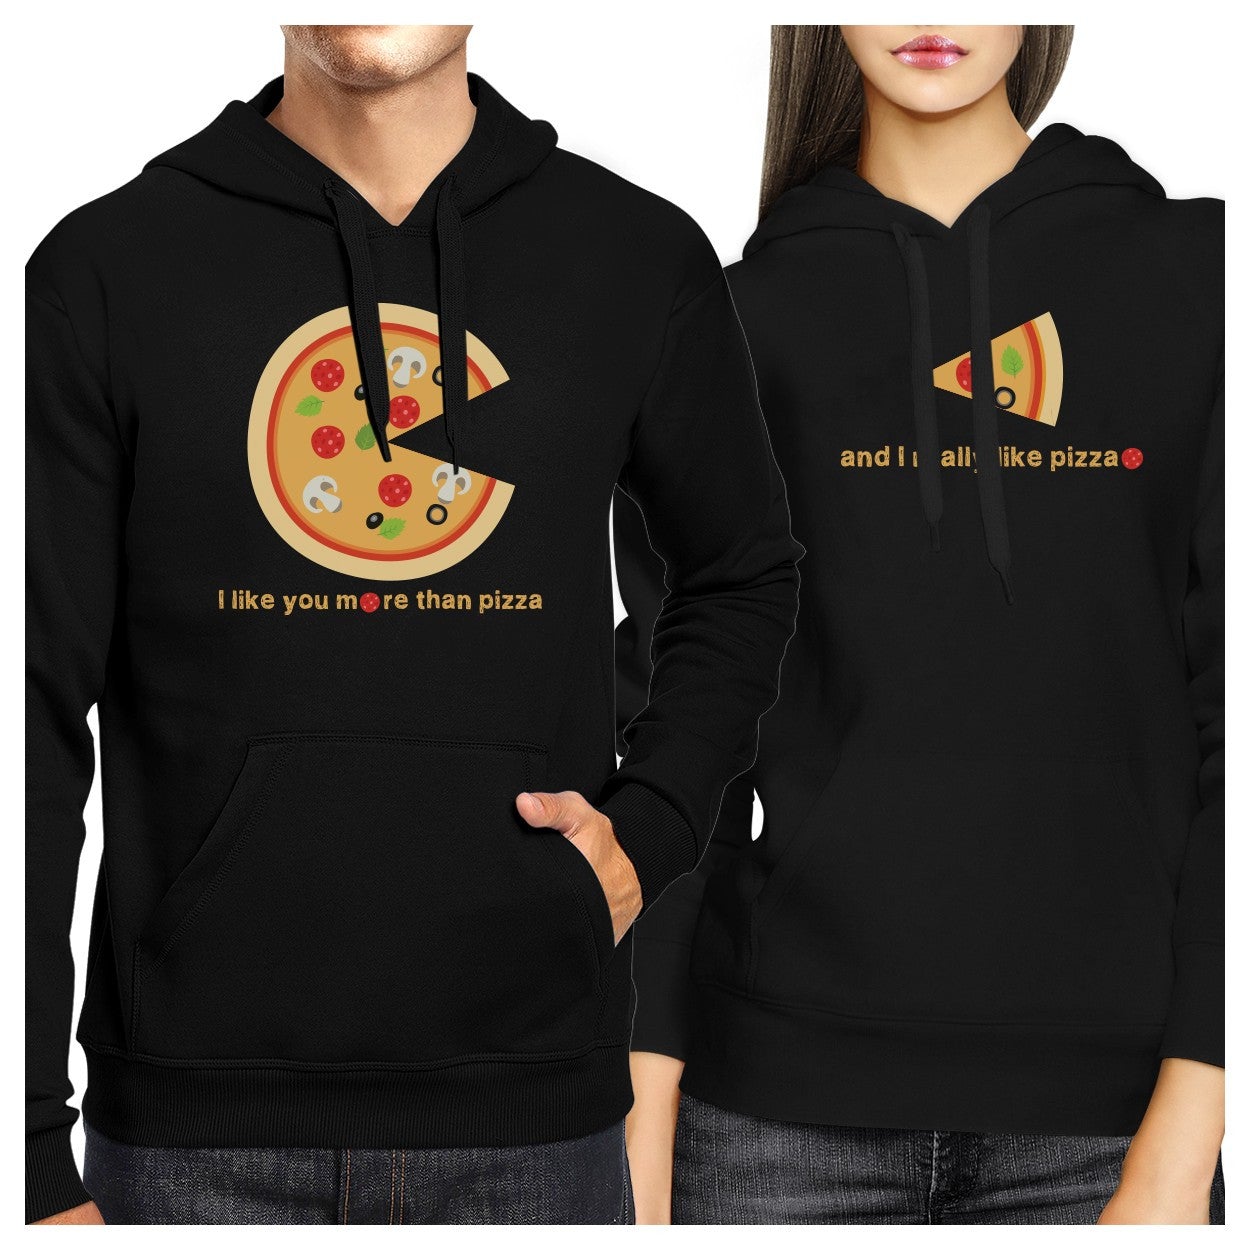 I Like You More Than Pizza Couple Hoodies Valentines Day Gift Idea Black